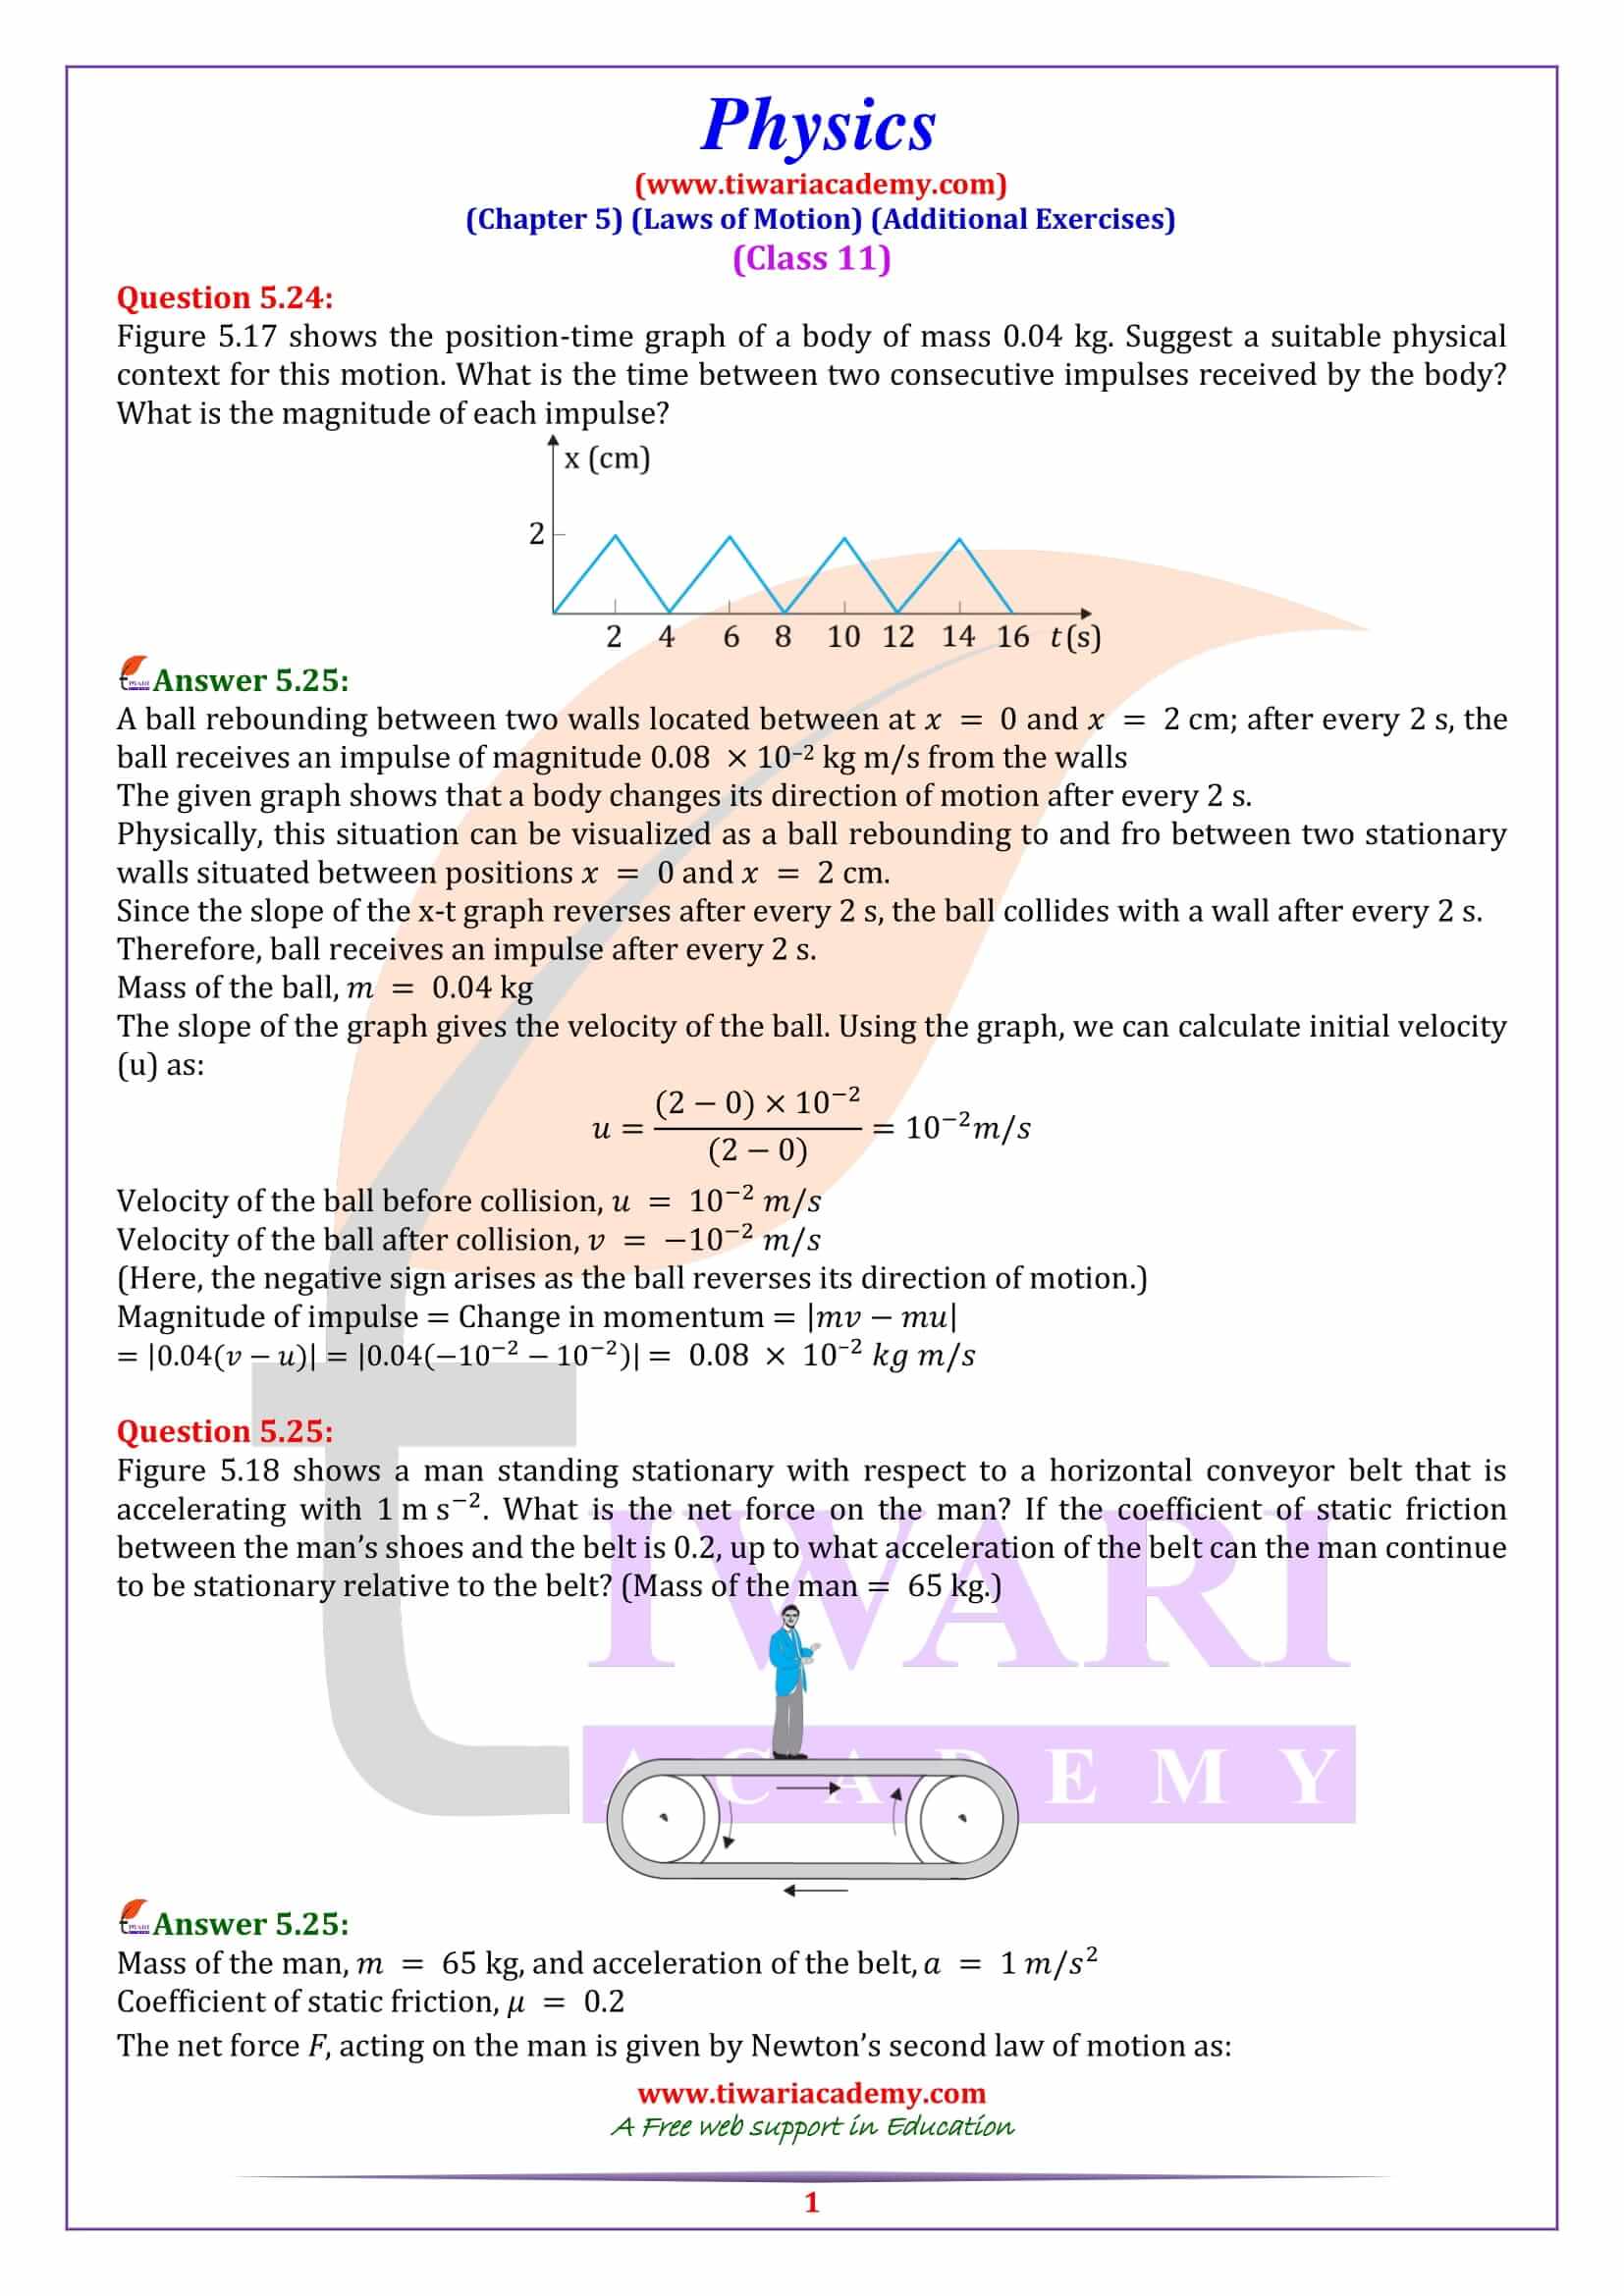 Class 11 Physics Chapter 5 Laws of Motion